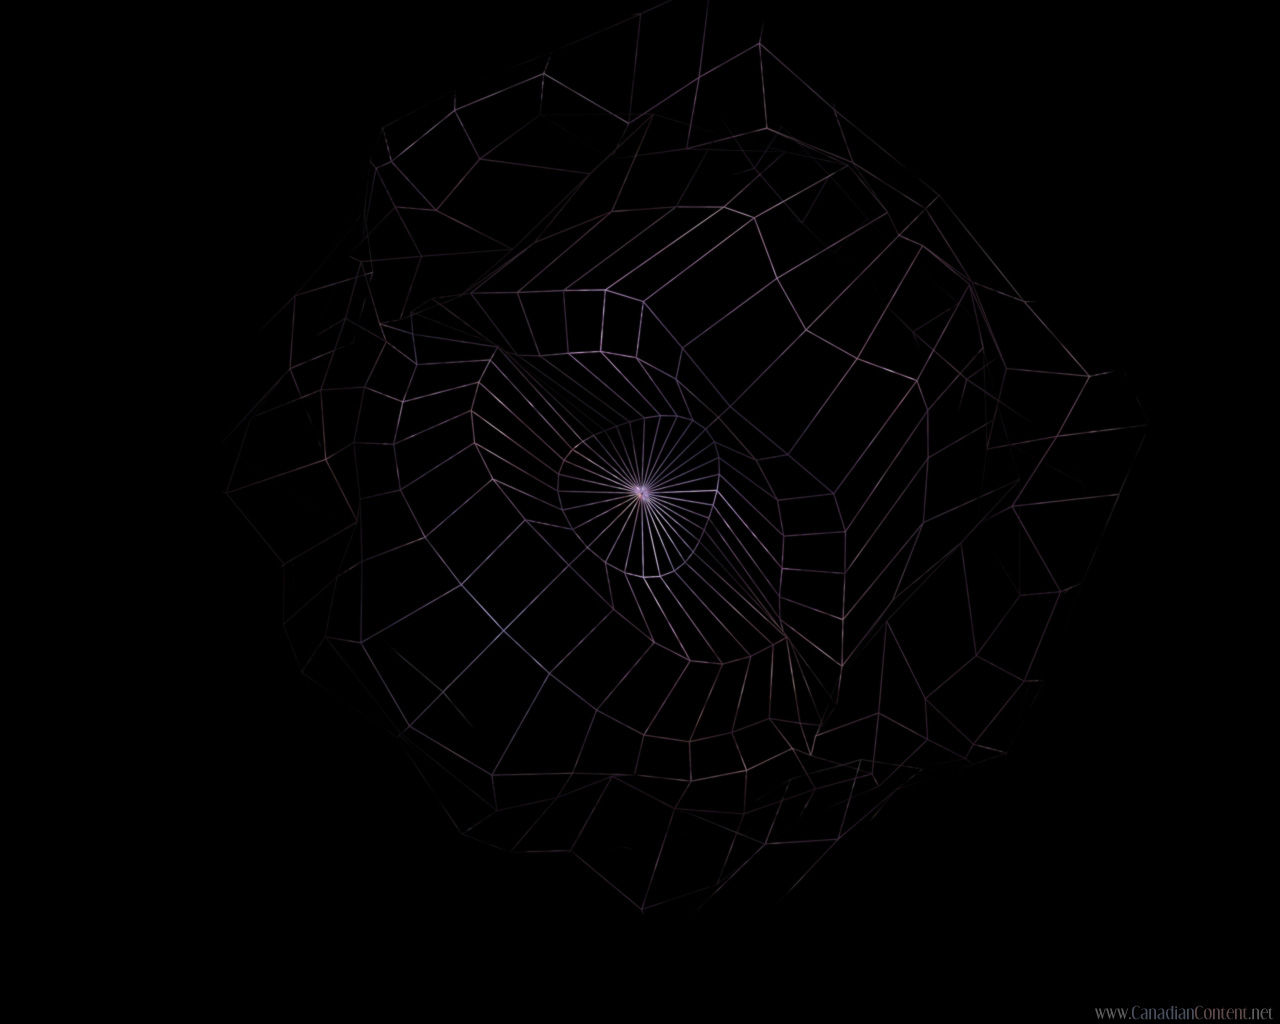 Spacey Spiderman Wallpaper For Your Desktop Highly Suggested